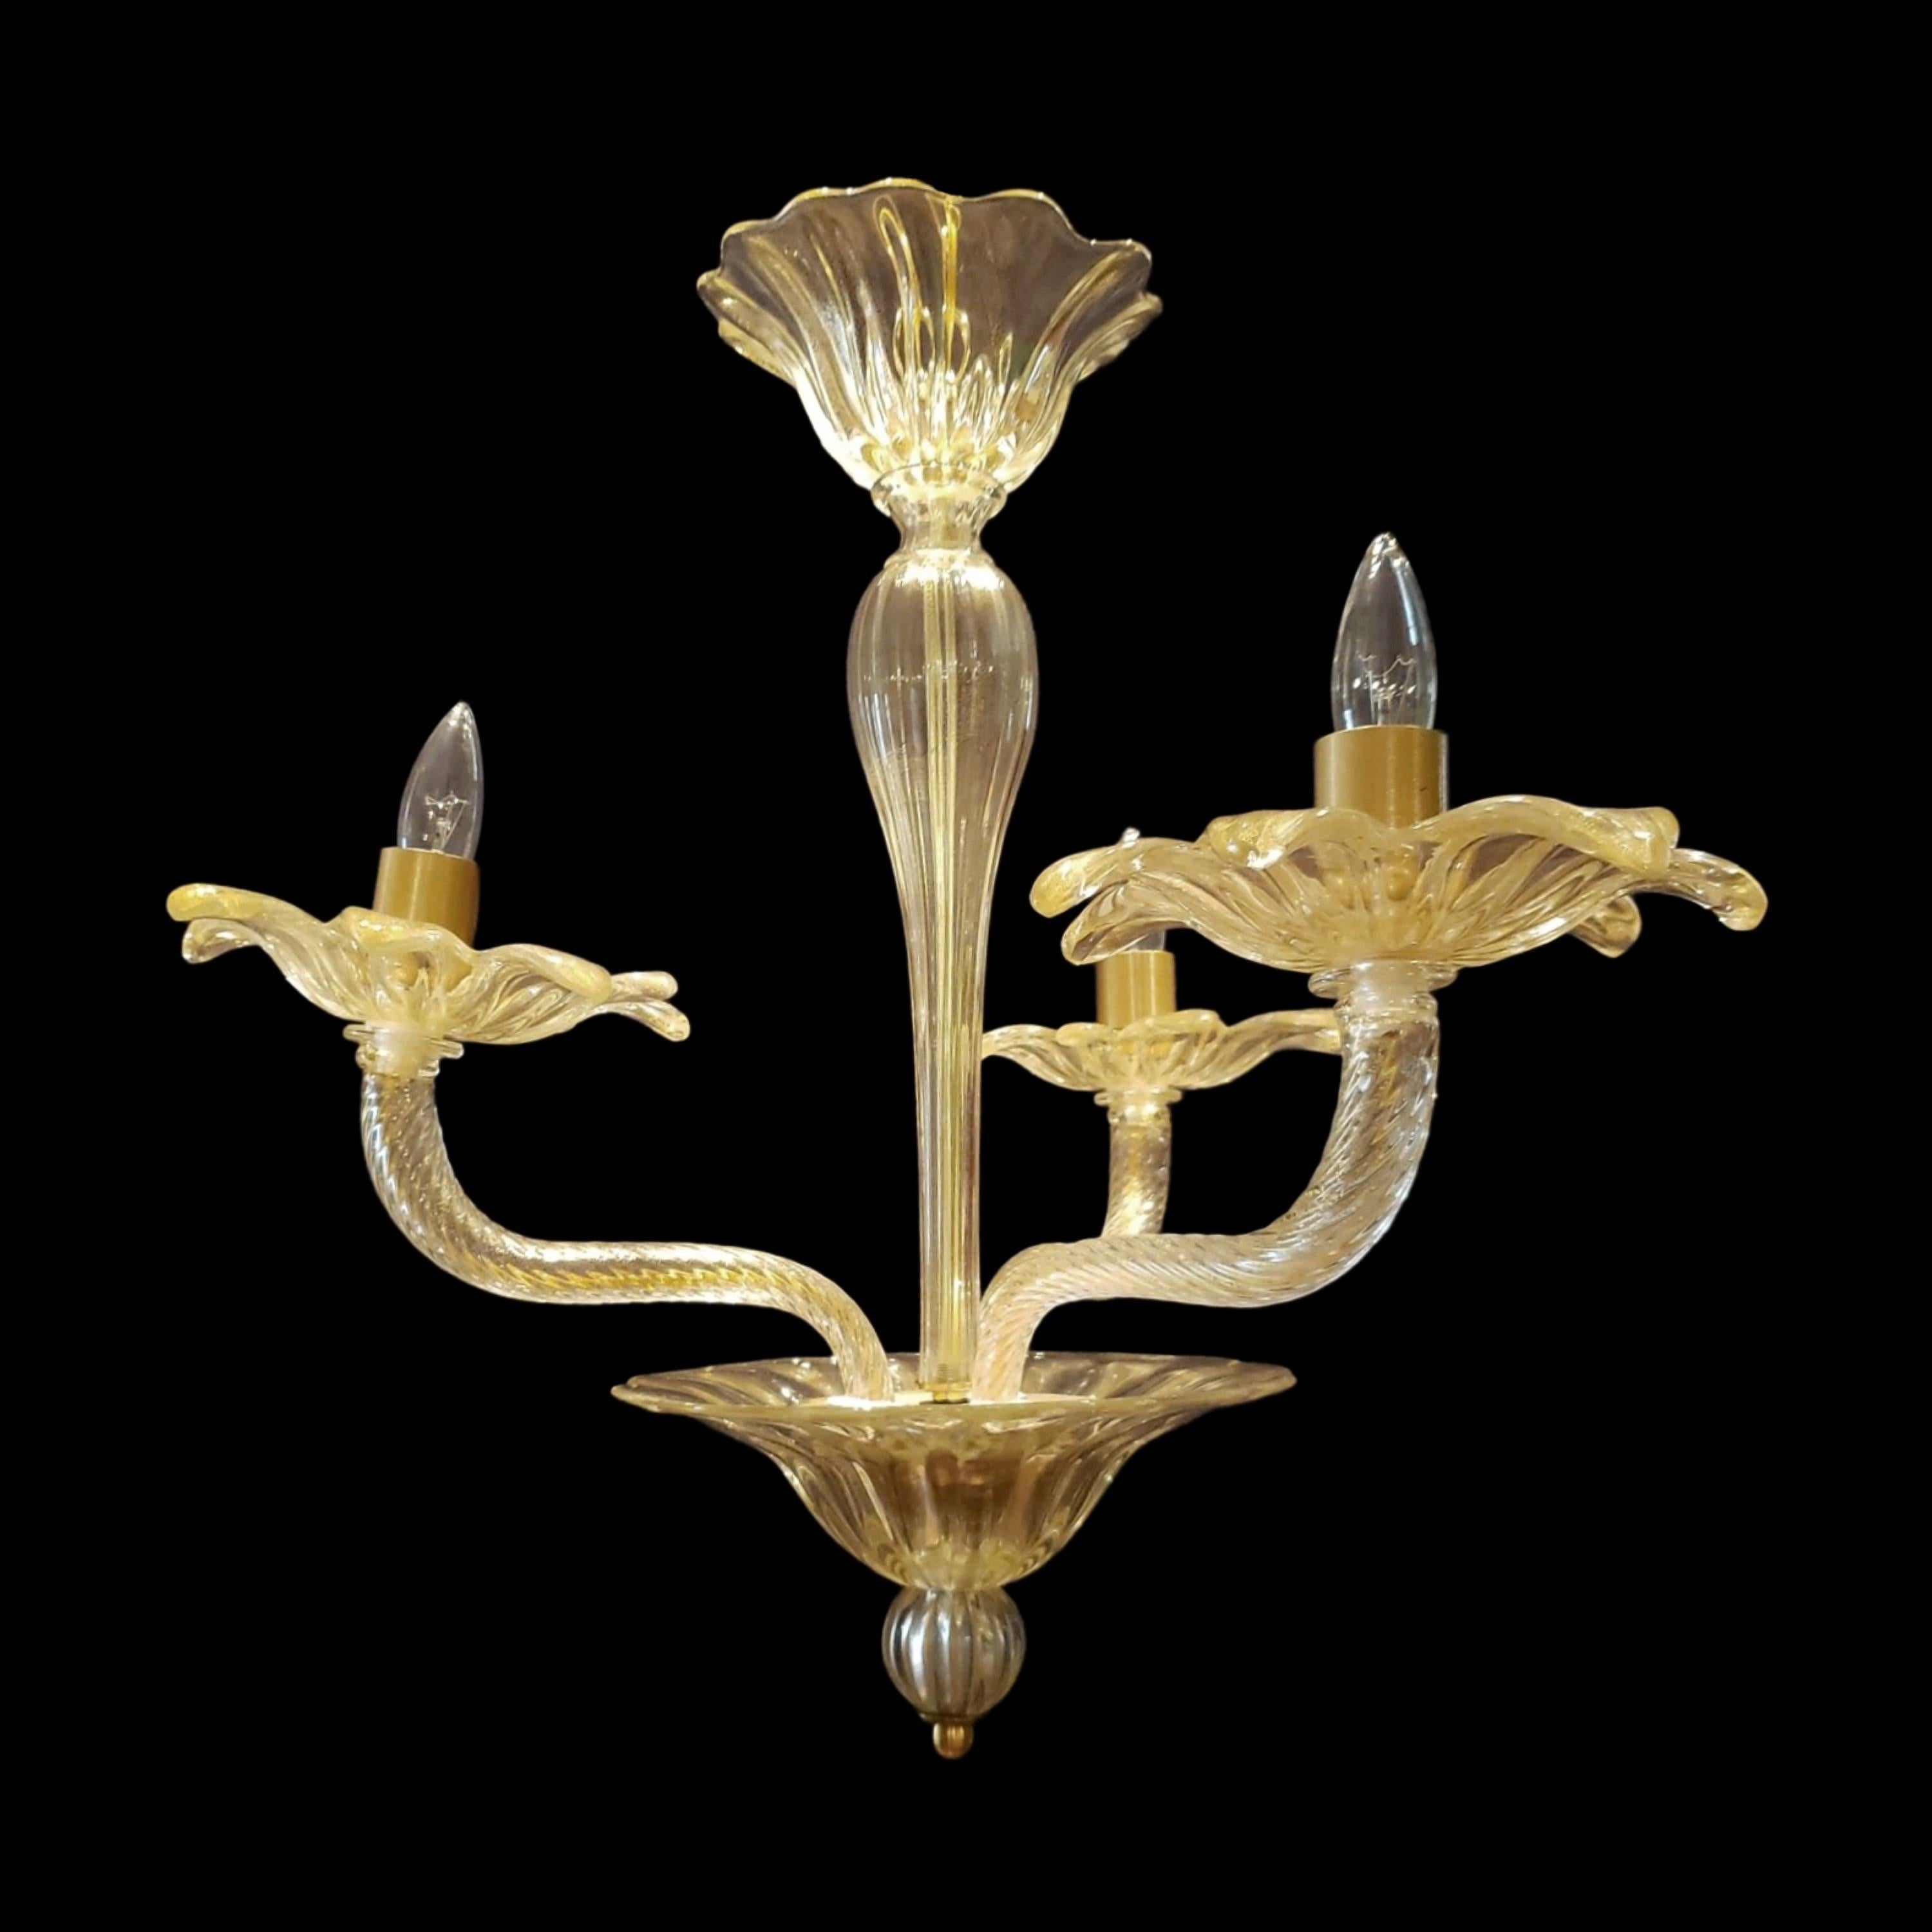 Hand blown Murano glass chandelier with three arms and gold inflections. This comes rewired and ready to install. Ships disassembled. Cleaned and restored. Please note, this item is located in our Scranton, PA location.